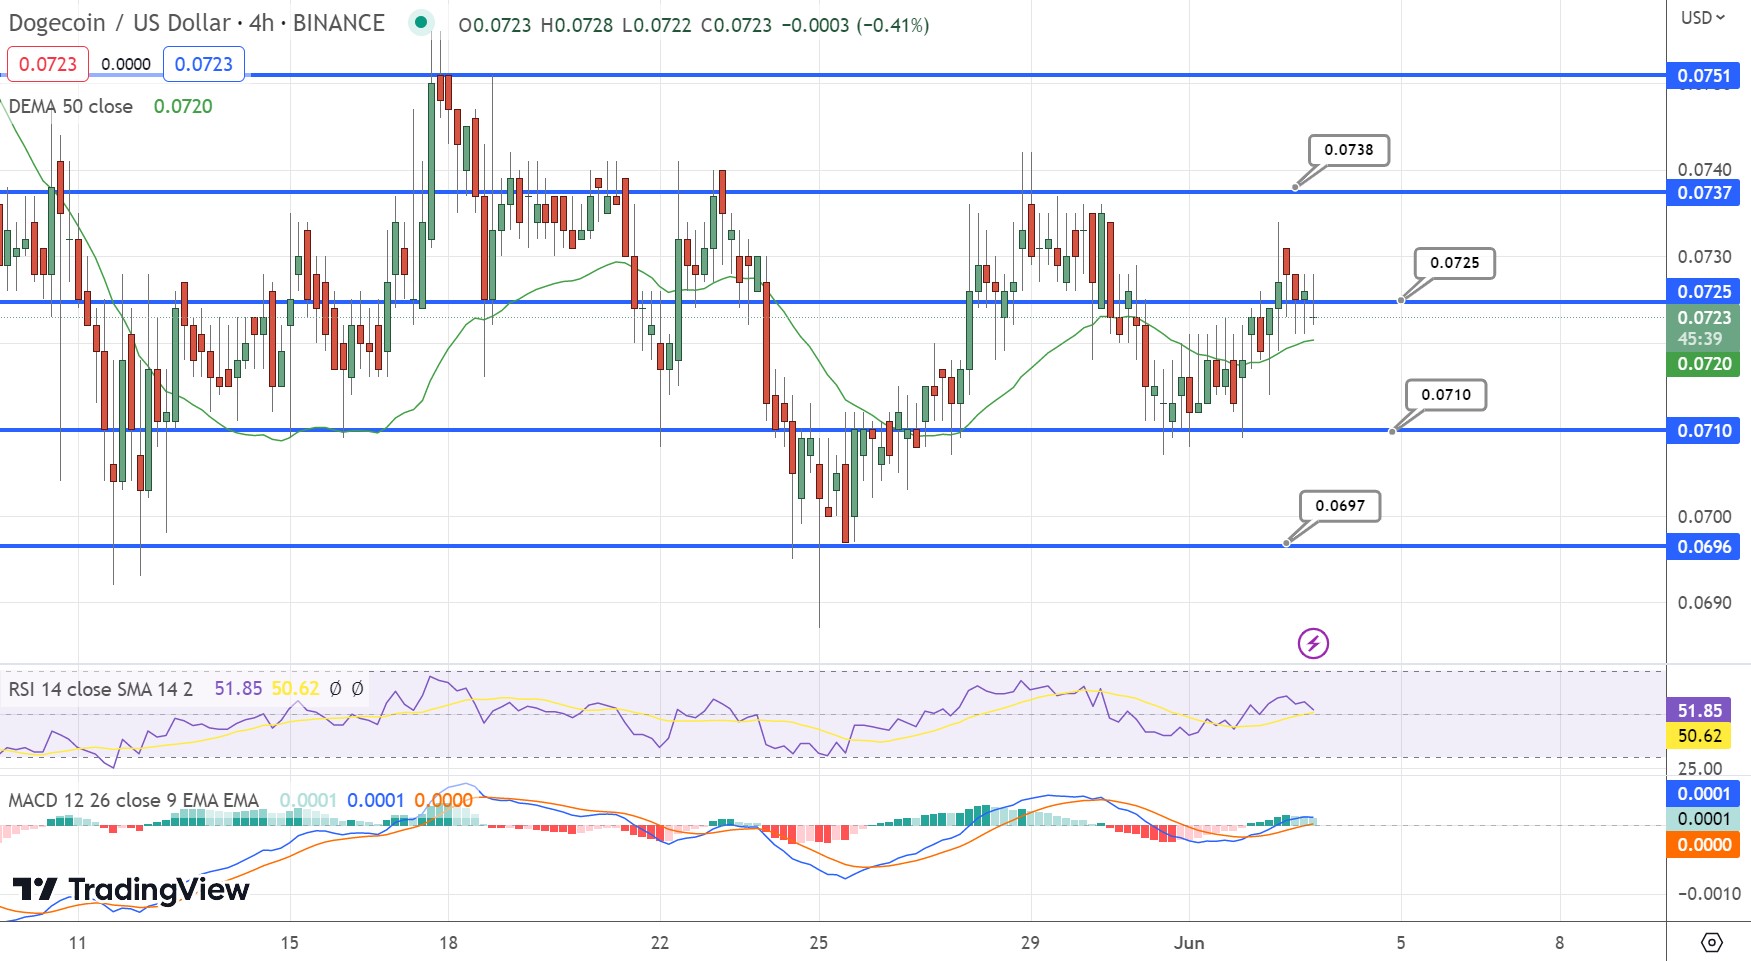 Dogecoin Price Forecast: Market Uncertainty and Key Resistance Levels to Watch